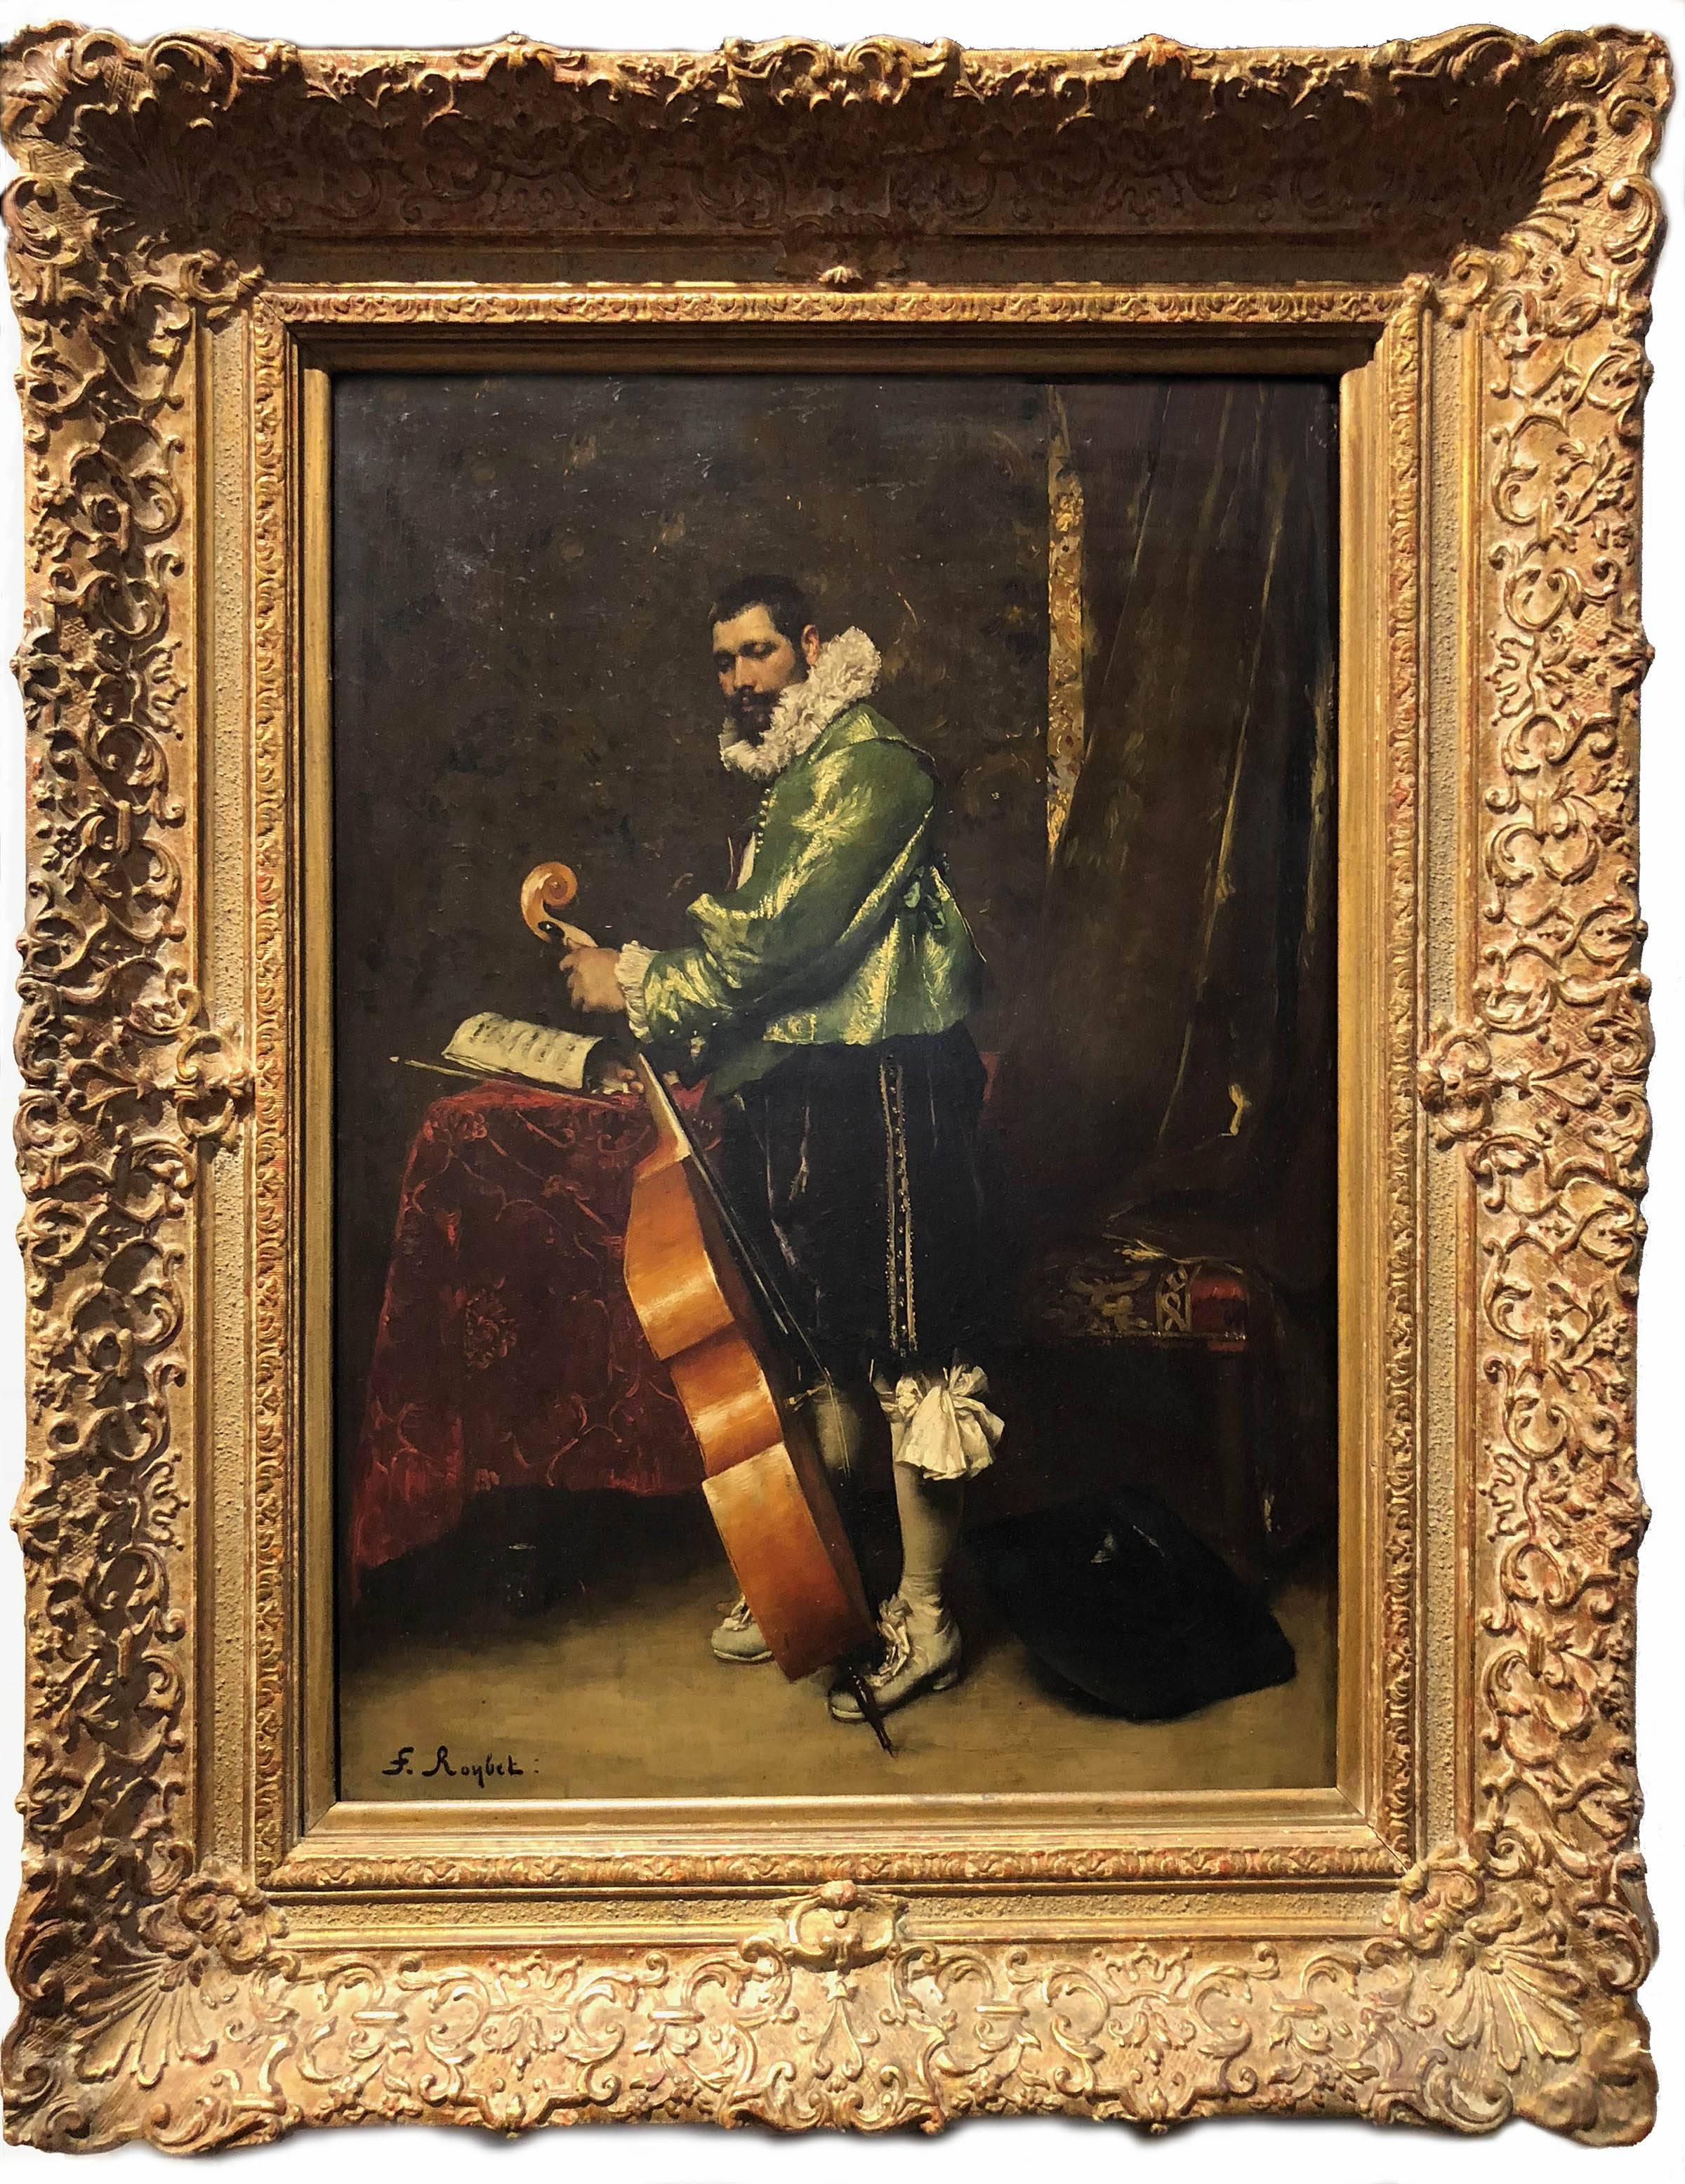 The Cellist - Painting by Ferdinand Victor Leon Roybet 